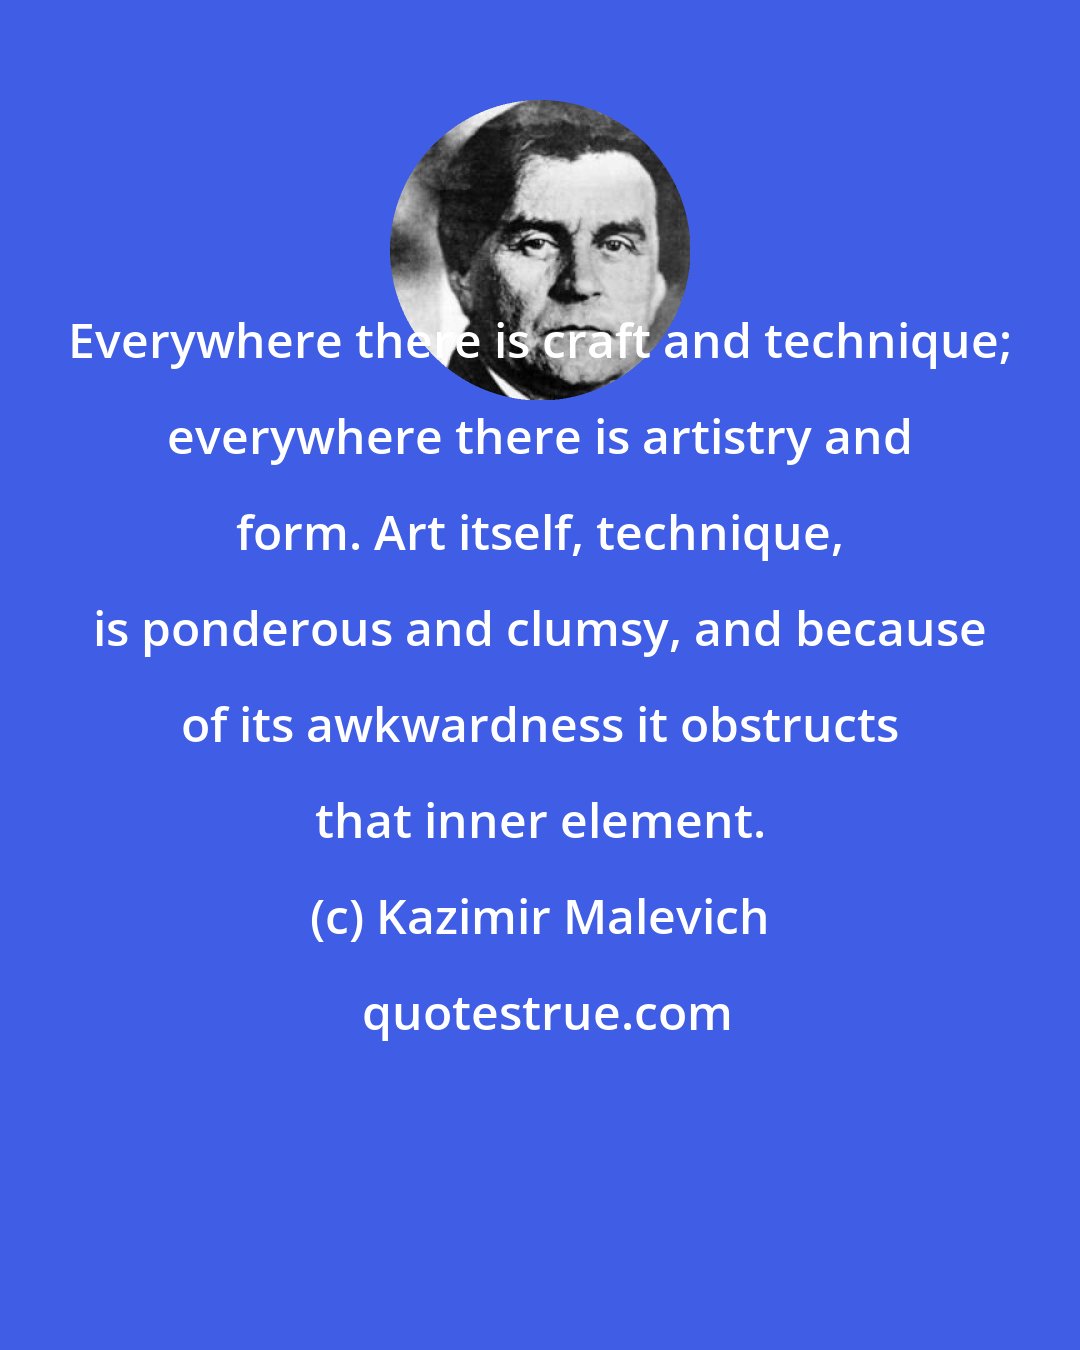 Kazimir Malevich: Everywhere there is craft and technique; everywhere there is artistry and form. Art itself, technique, is ponderous and clumsy, and because of its awkwardness it obstructs that inner element.